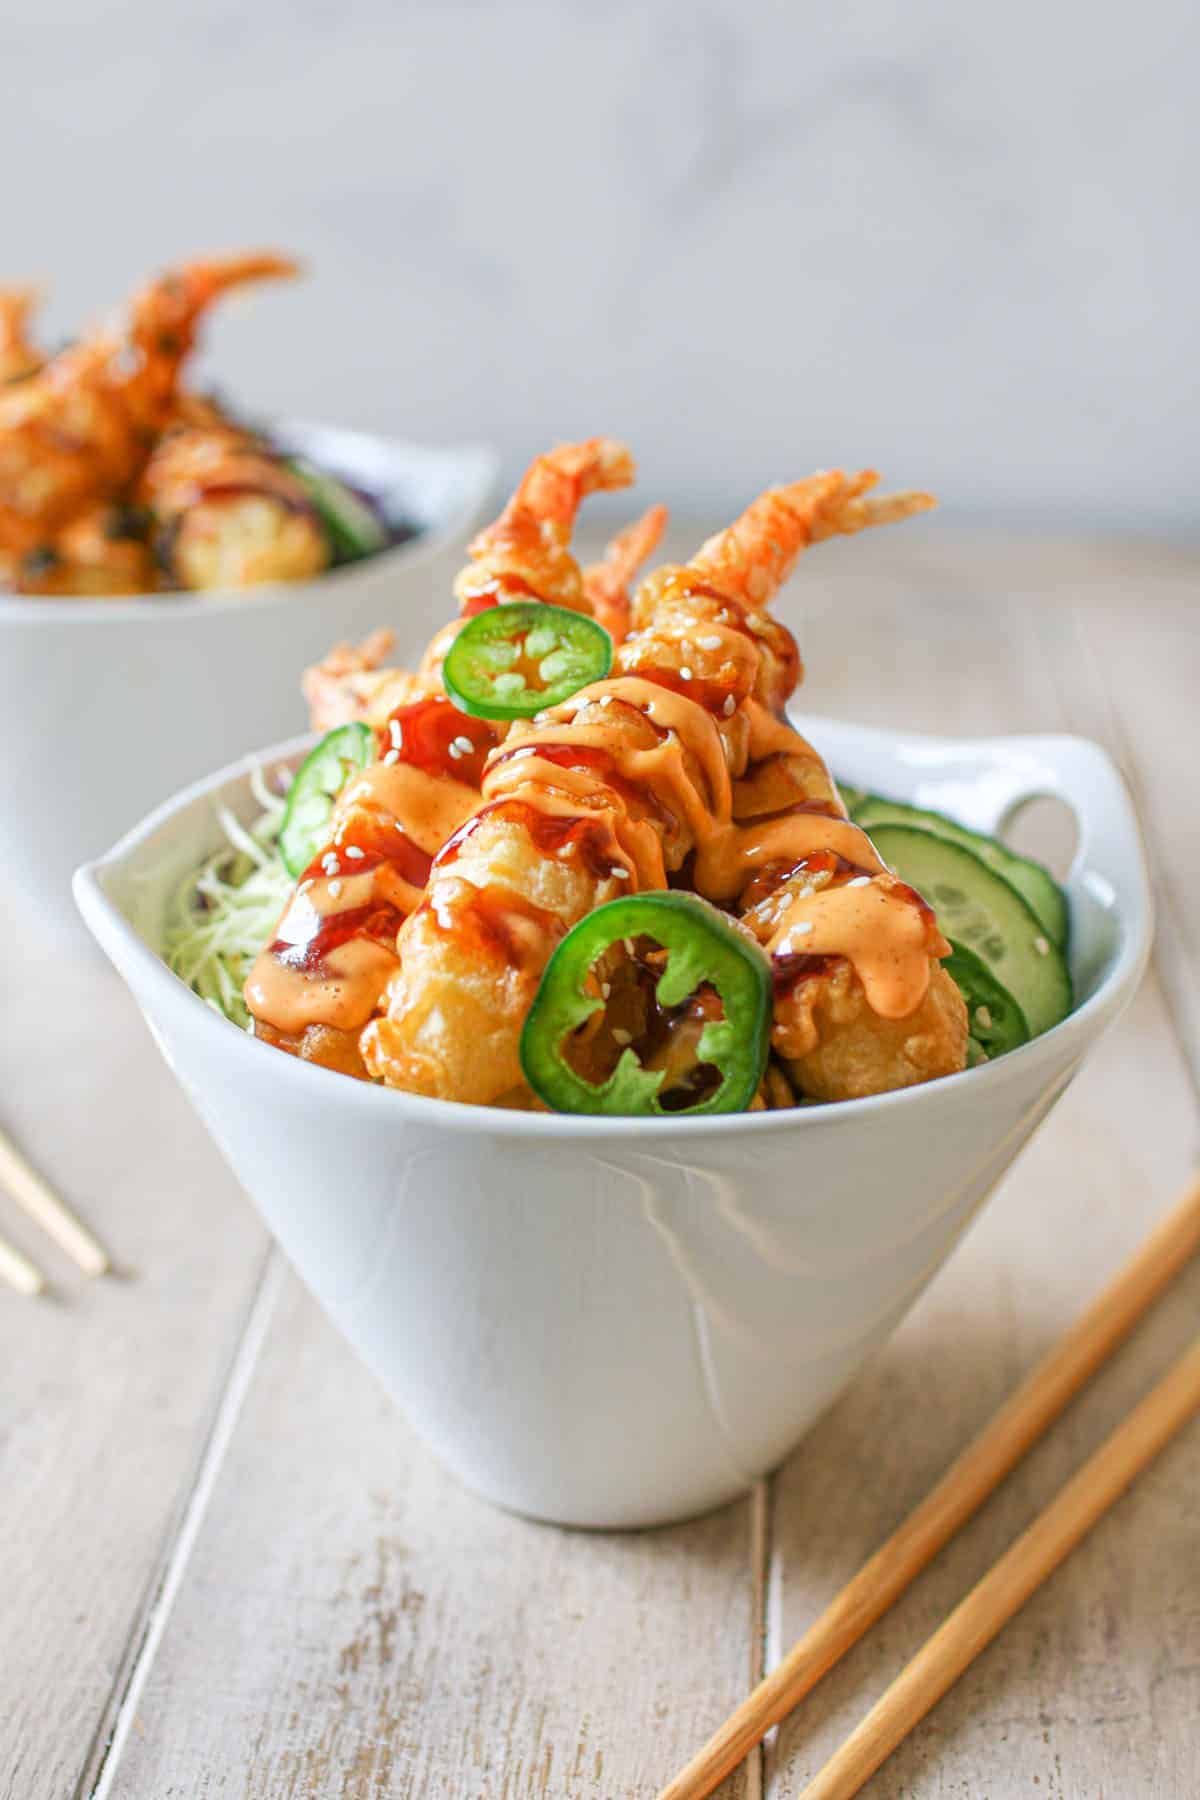  A white bowl with Frozen Tempura Shrimp in Air Fryer with sriracha mayo, sweet soy sauce, thinly sliced red and green cabbage, cucumber, rice, thin jalapeno and white sesame seeds. Another bowl is off in the background with 2 pairs of chopsticks on a wood table and a white marble background.